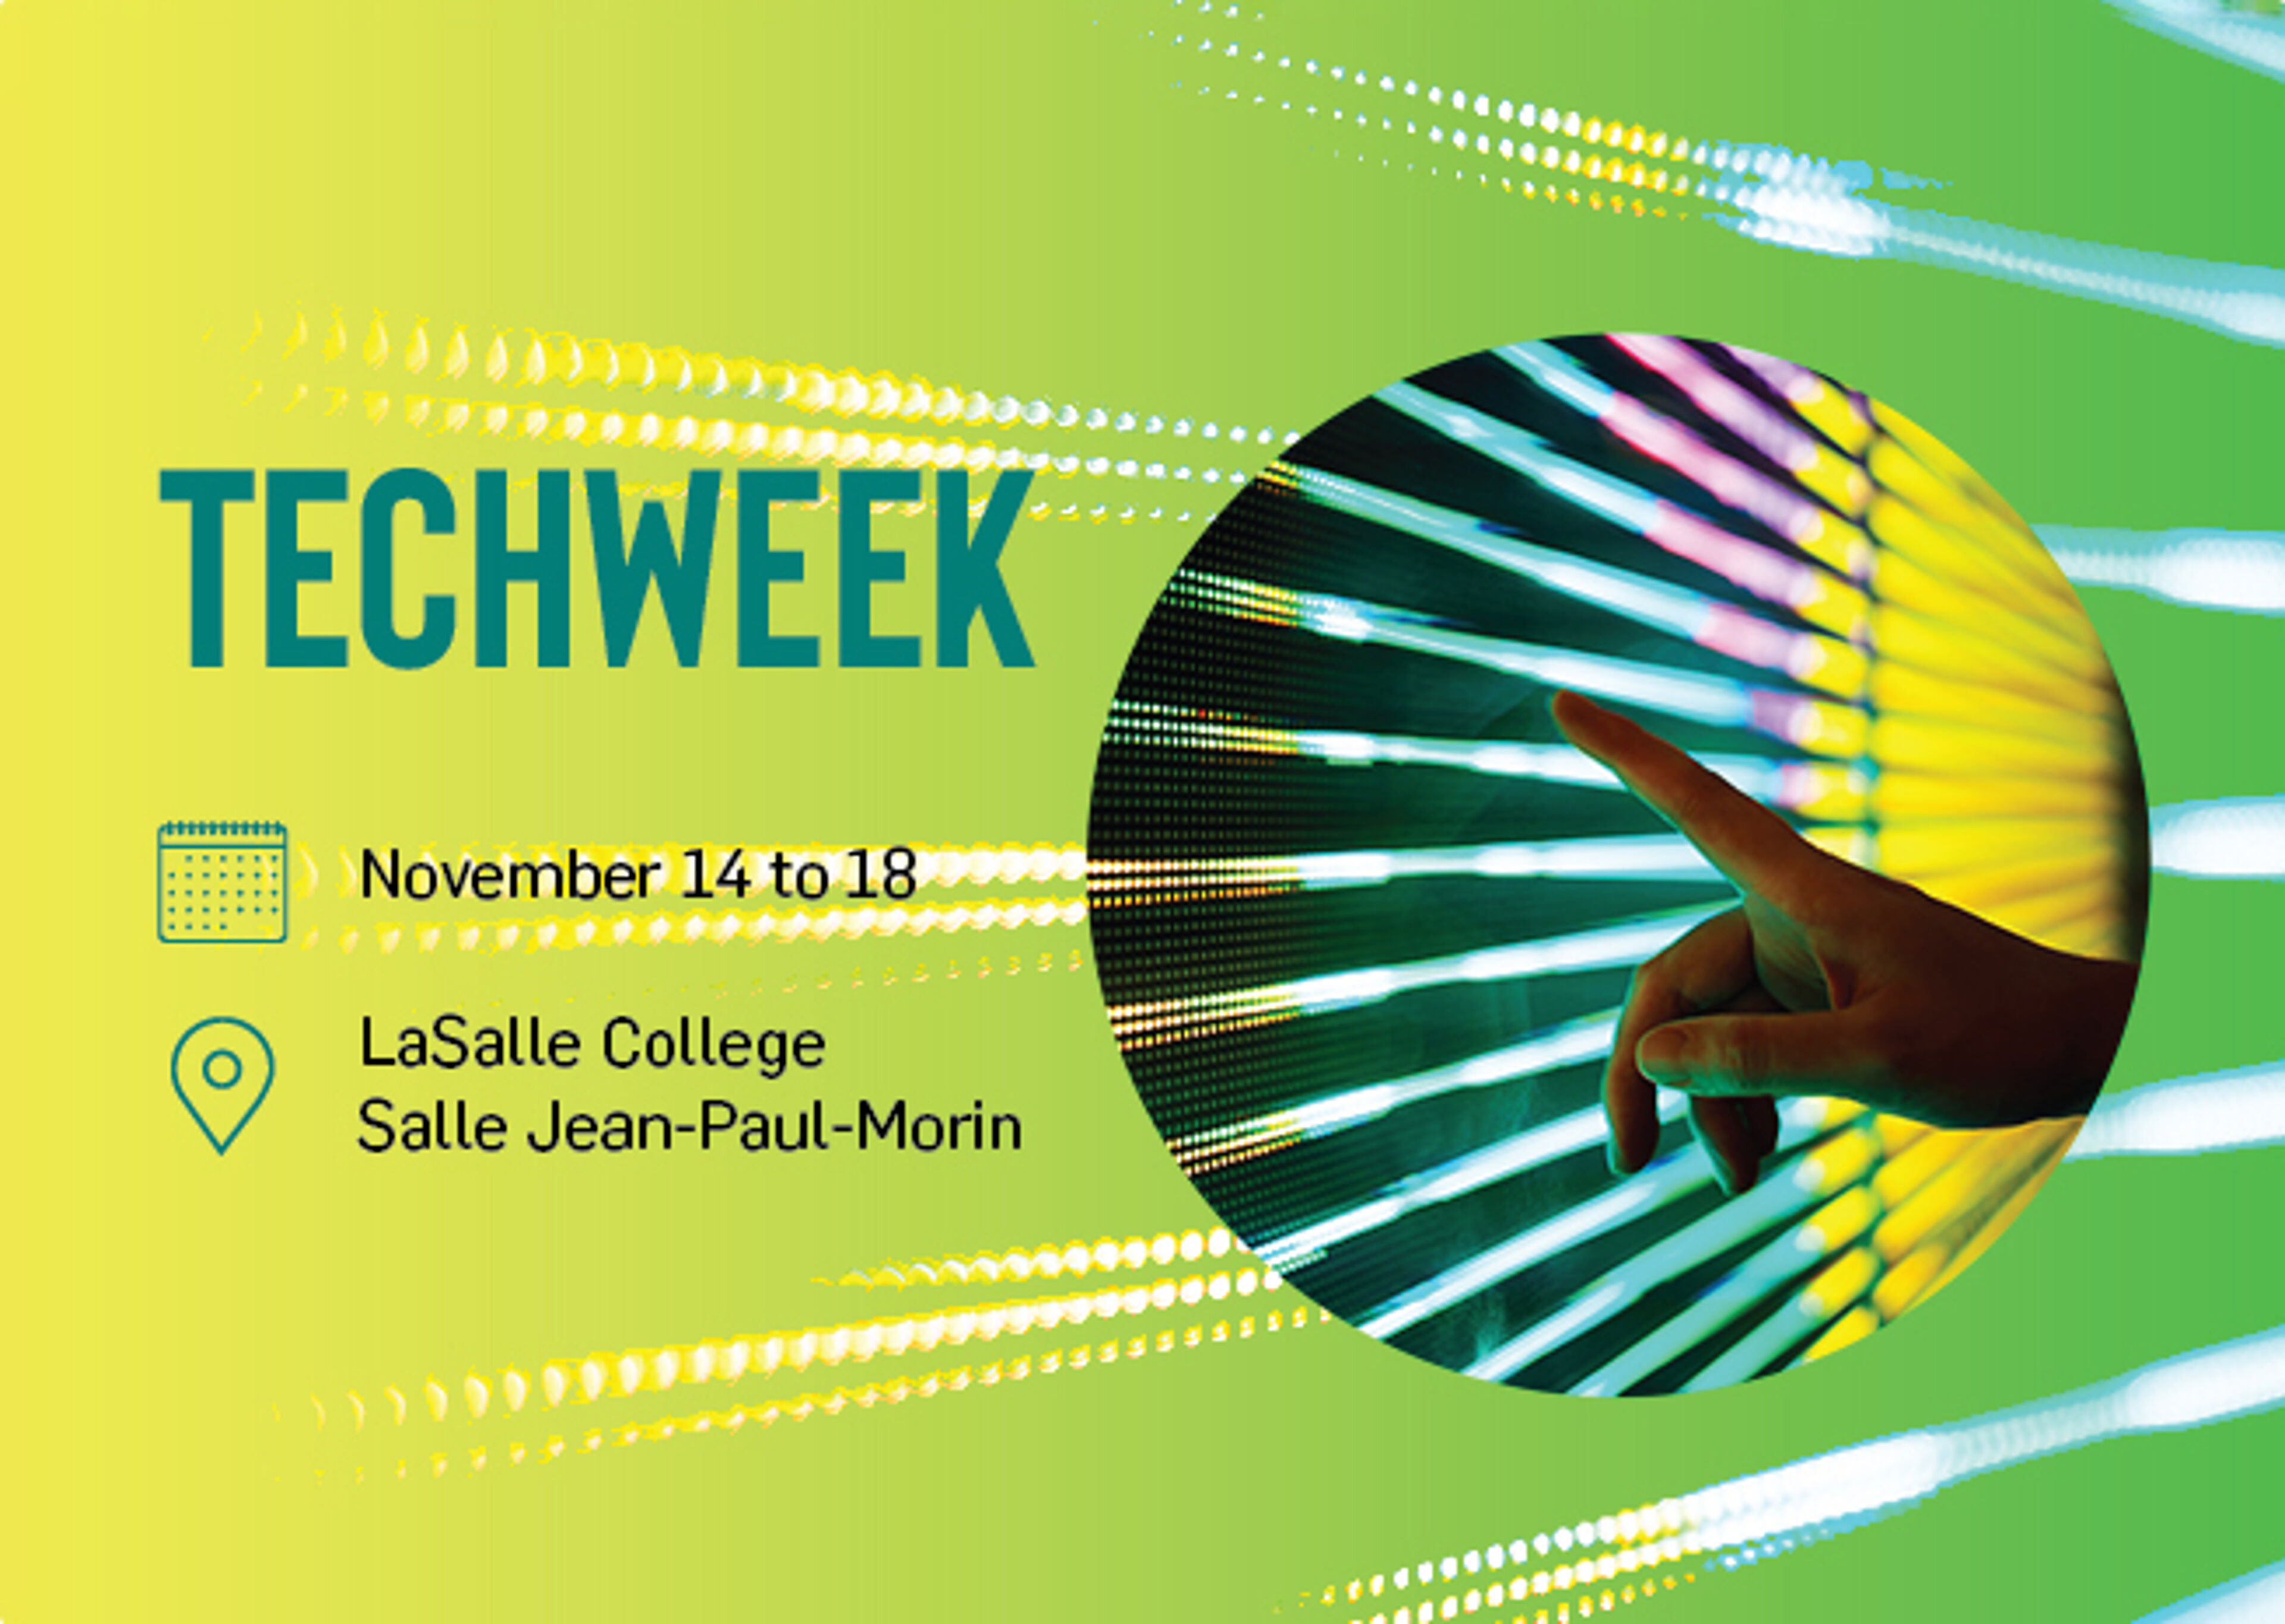 Graphic for Tech Week, November 14 to 18, at LaSalle College, Salle Jean-Paul-Morin, featuring a digital art motif.